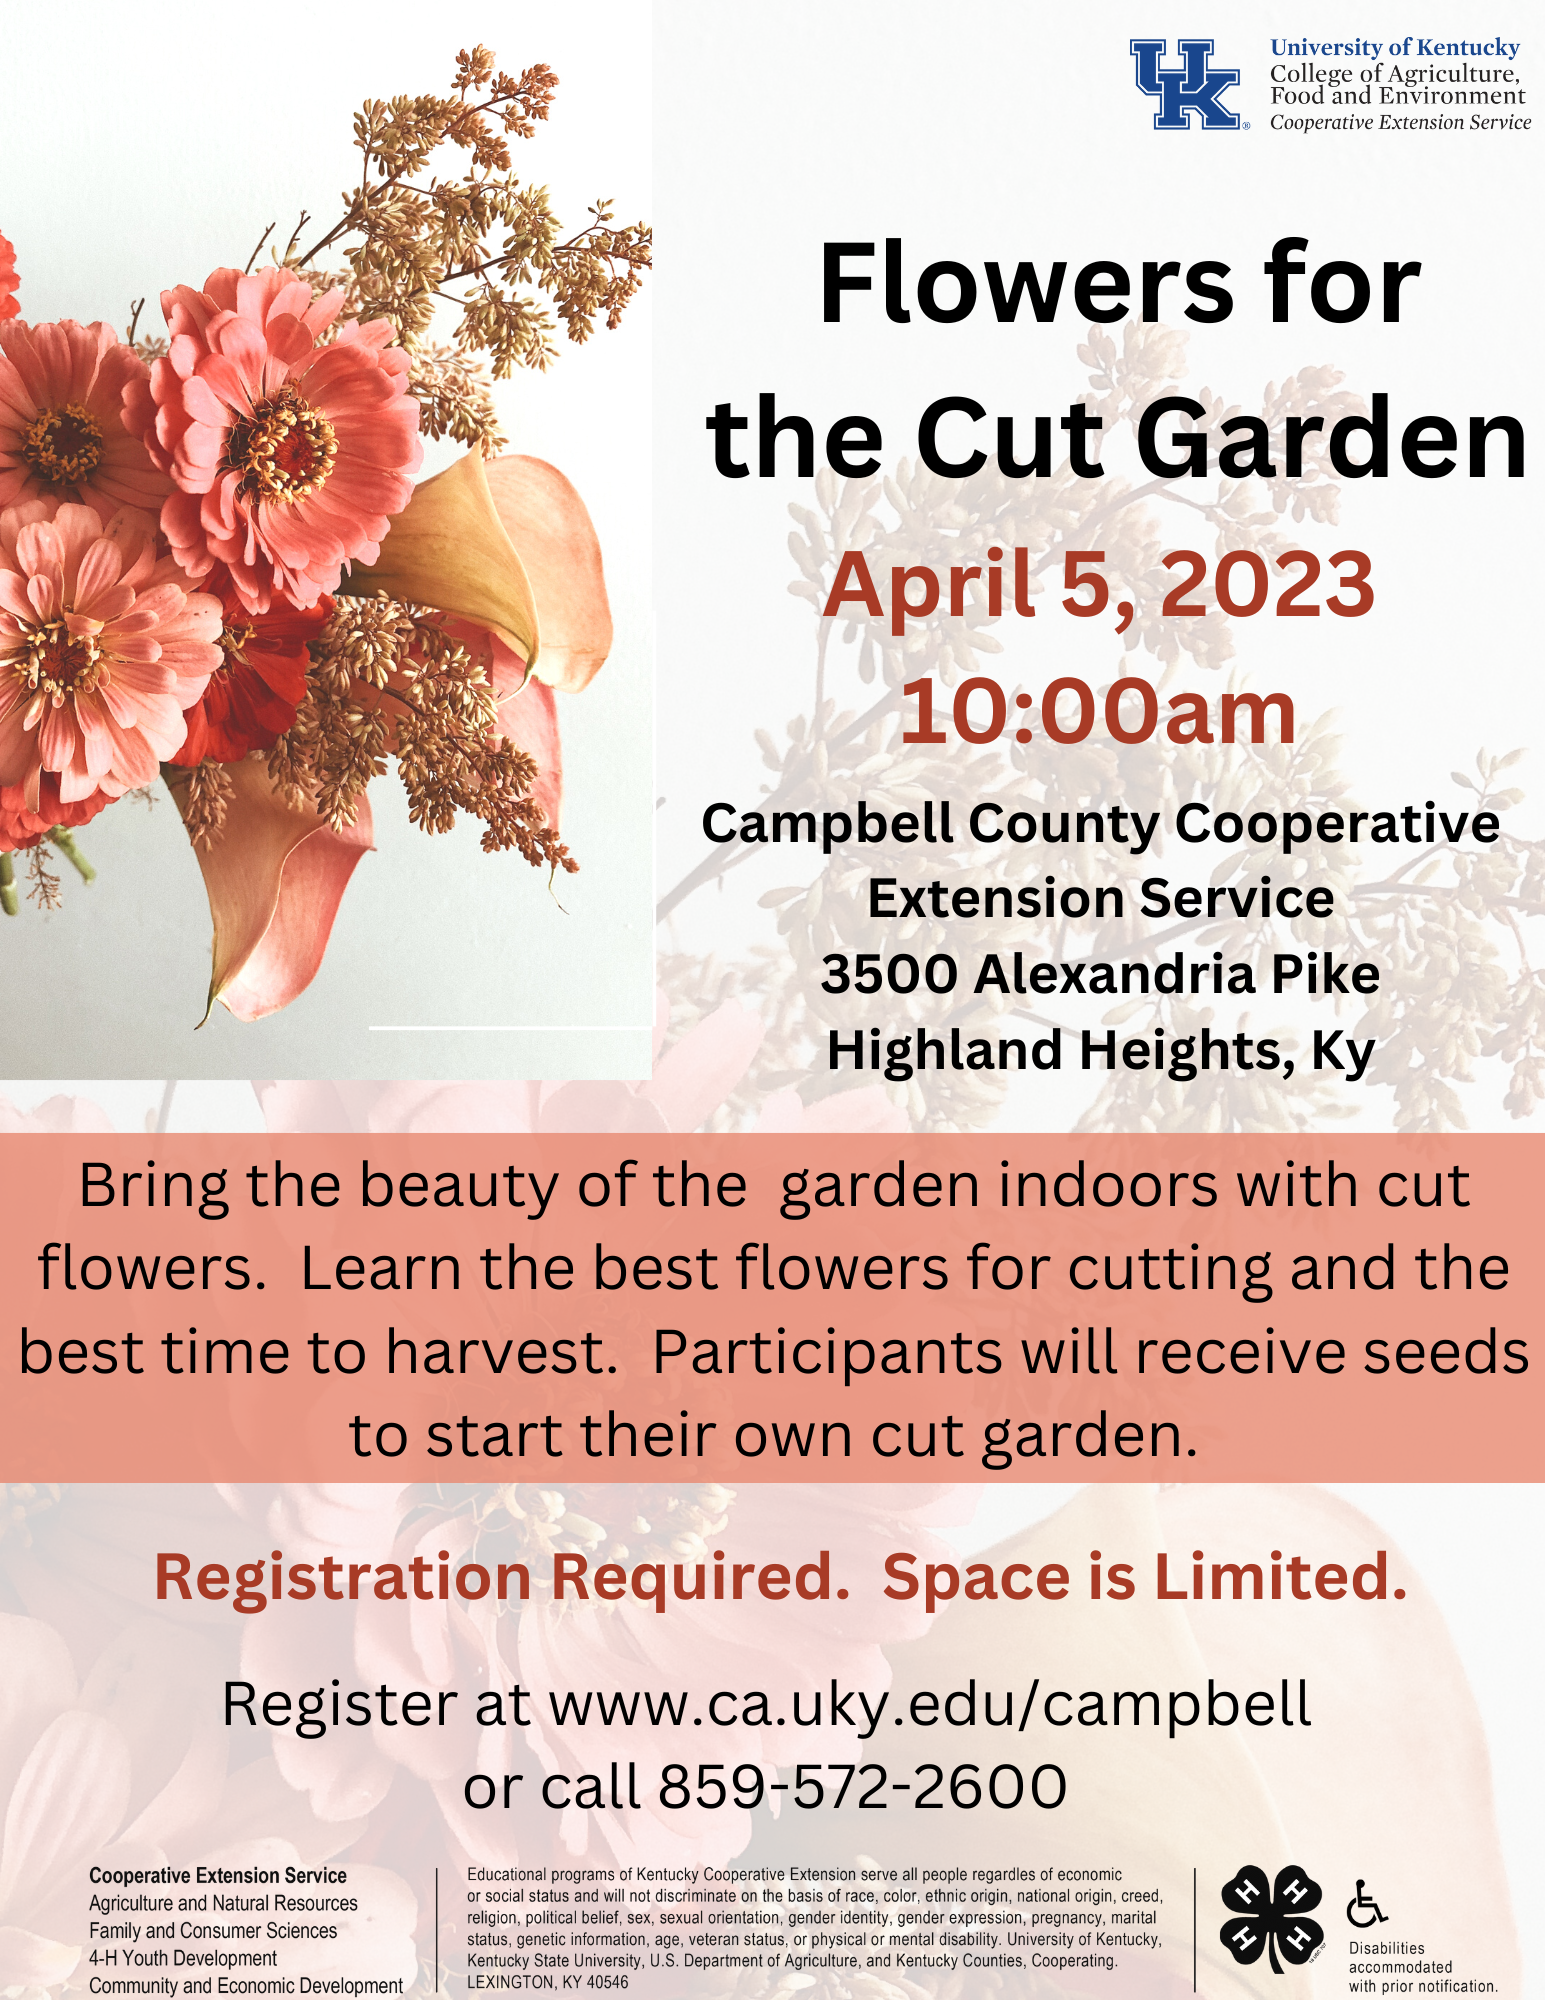 Flowers for the Cut Garden: April 5 at 10am at the Campbell County Cooperative Extension Office (3500 Alexandria Pike Highland Heights, KY 41076). Bring the beauty of the garden indoors with cut flowers. Register at 859-572-2600.